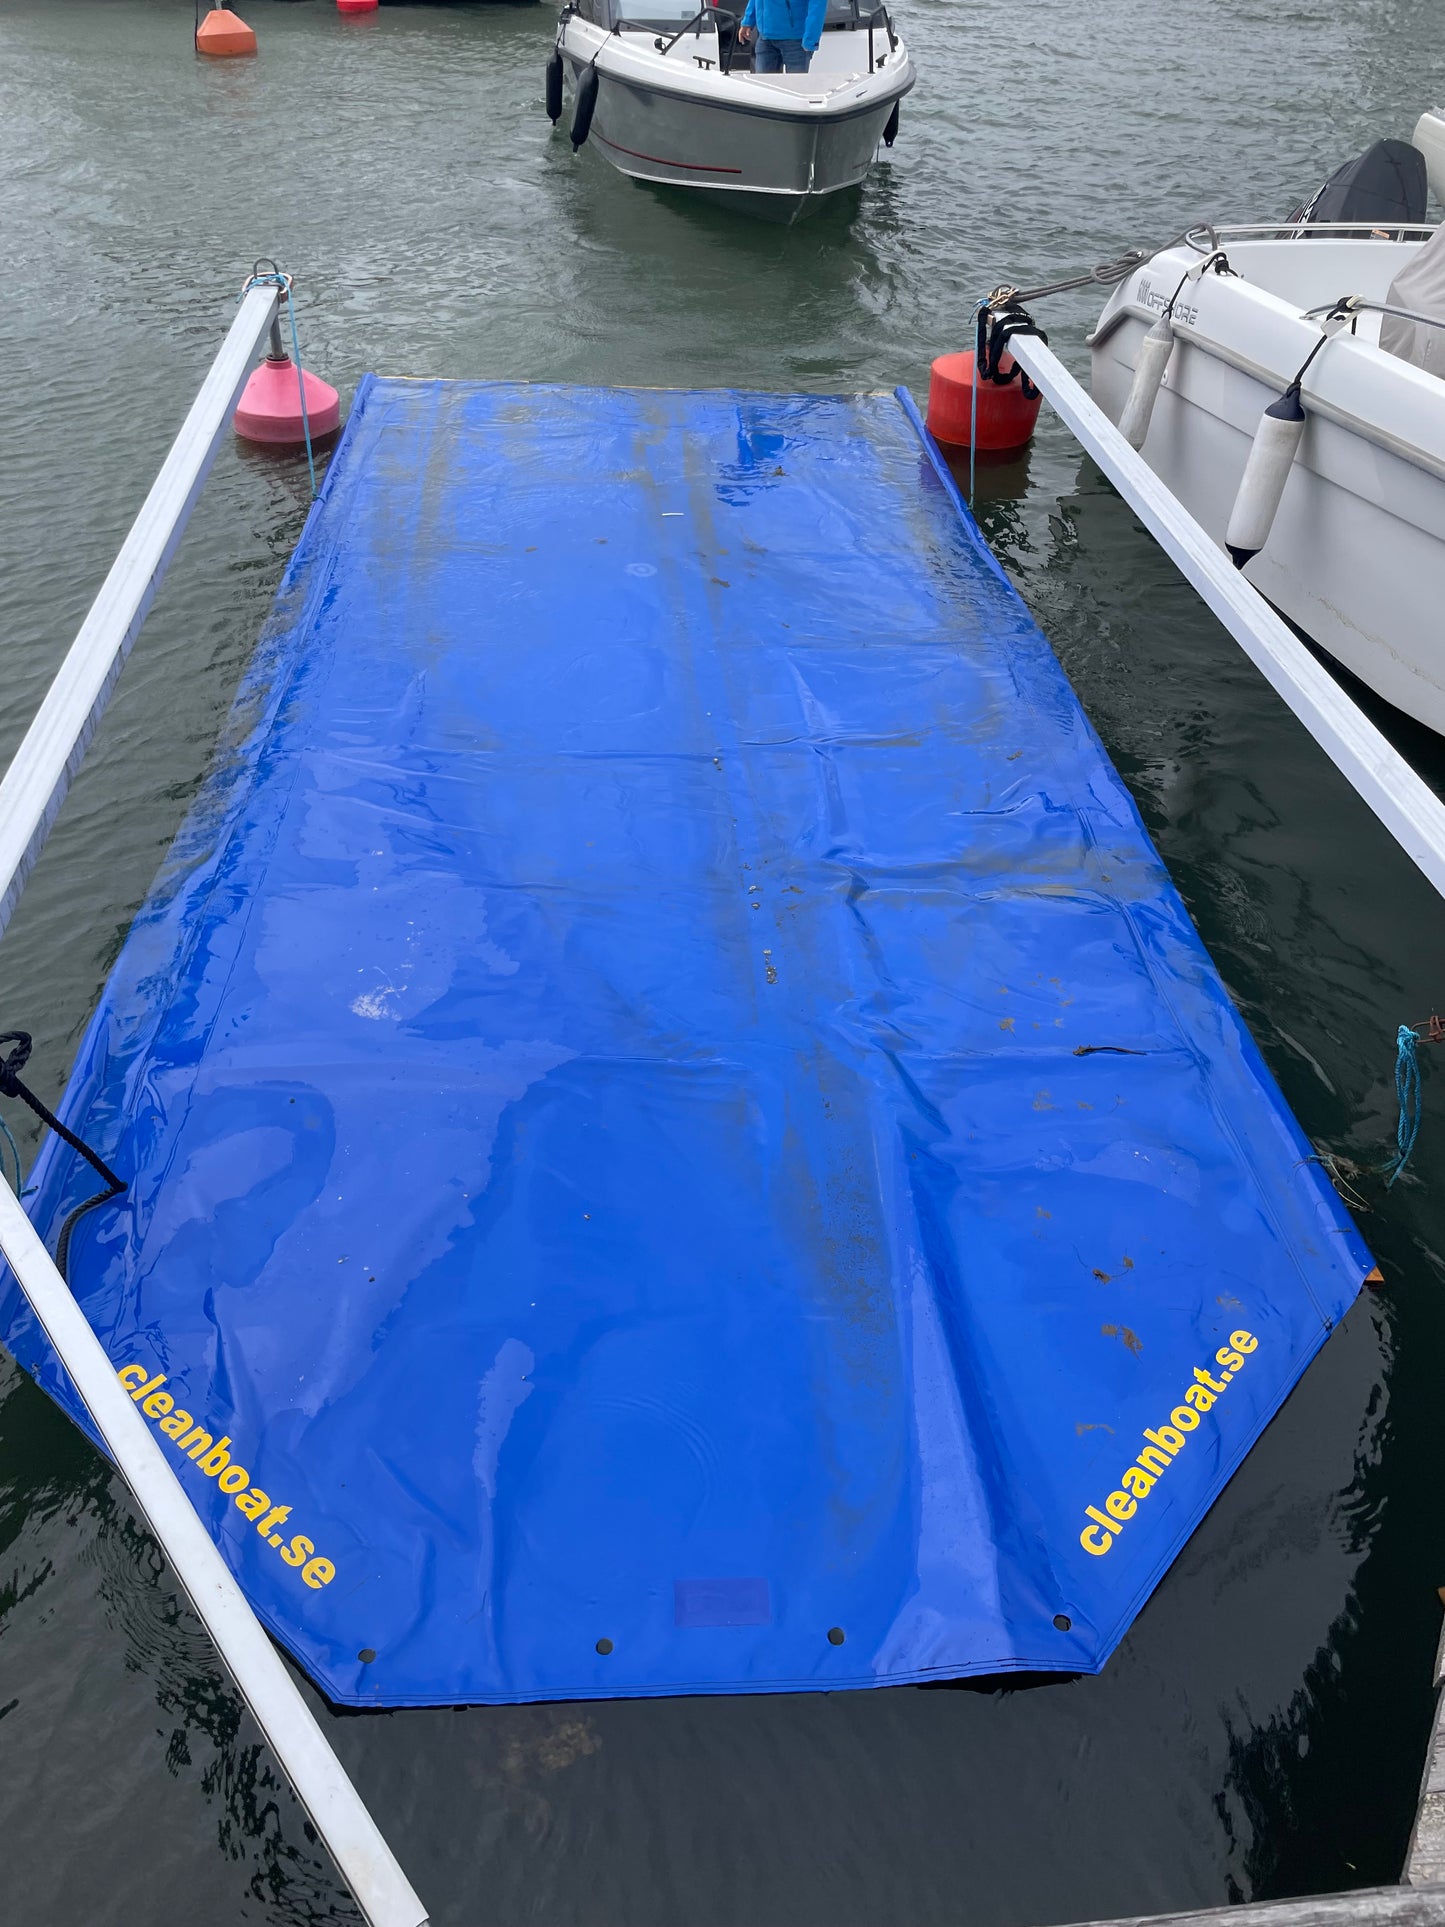 The Boat Bottom Protector